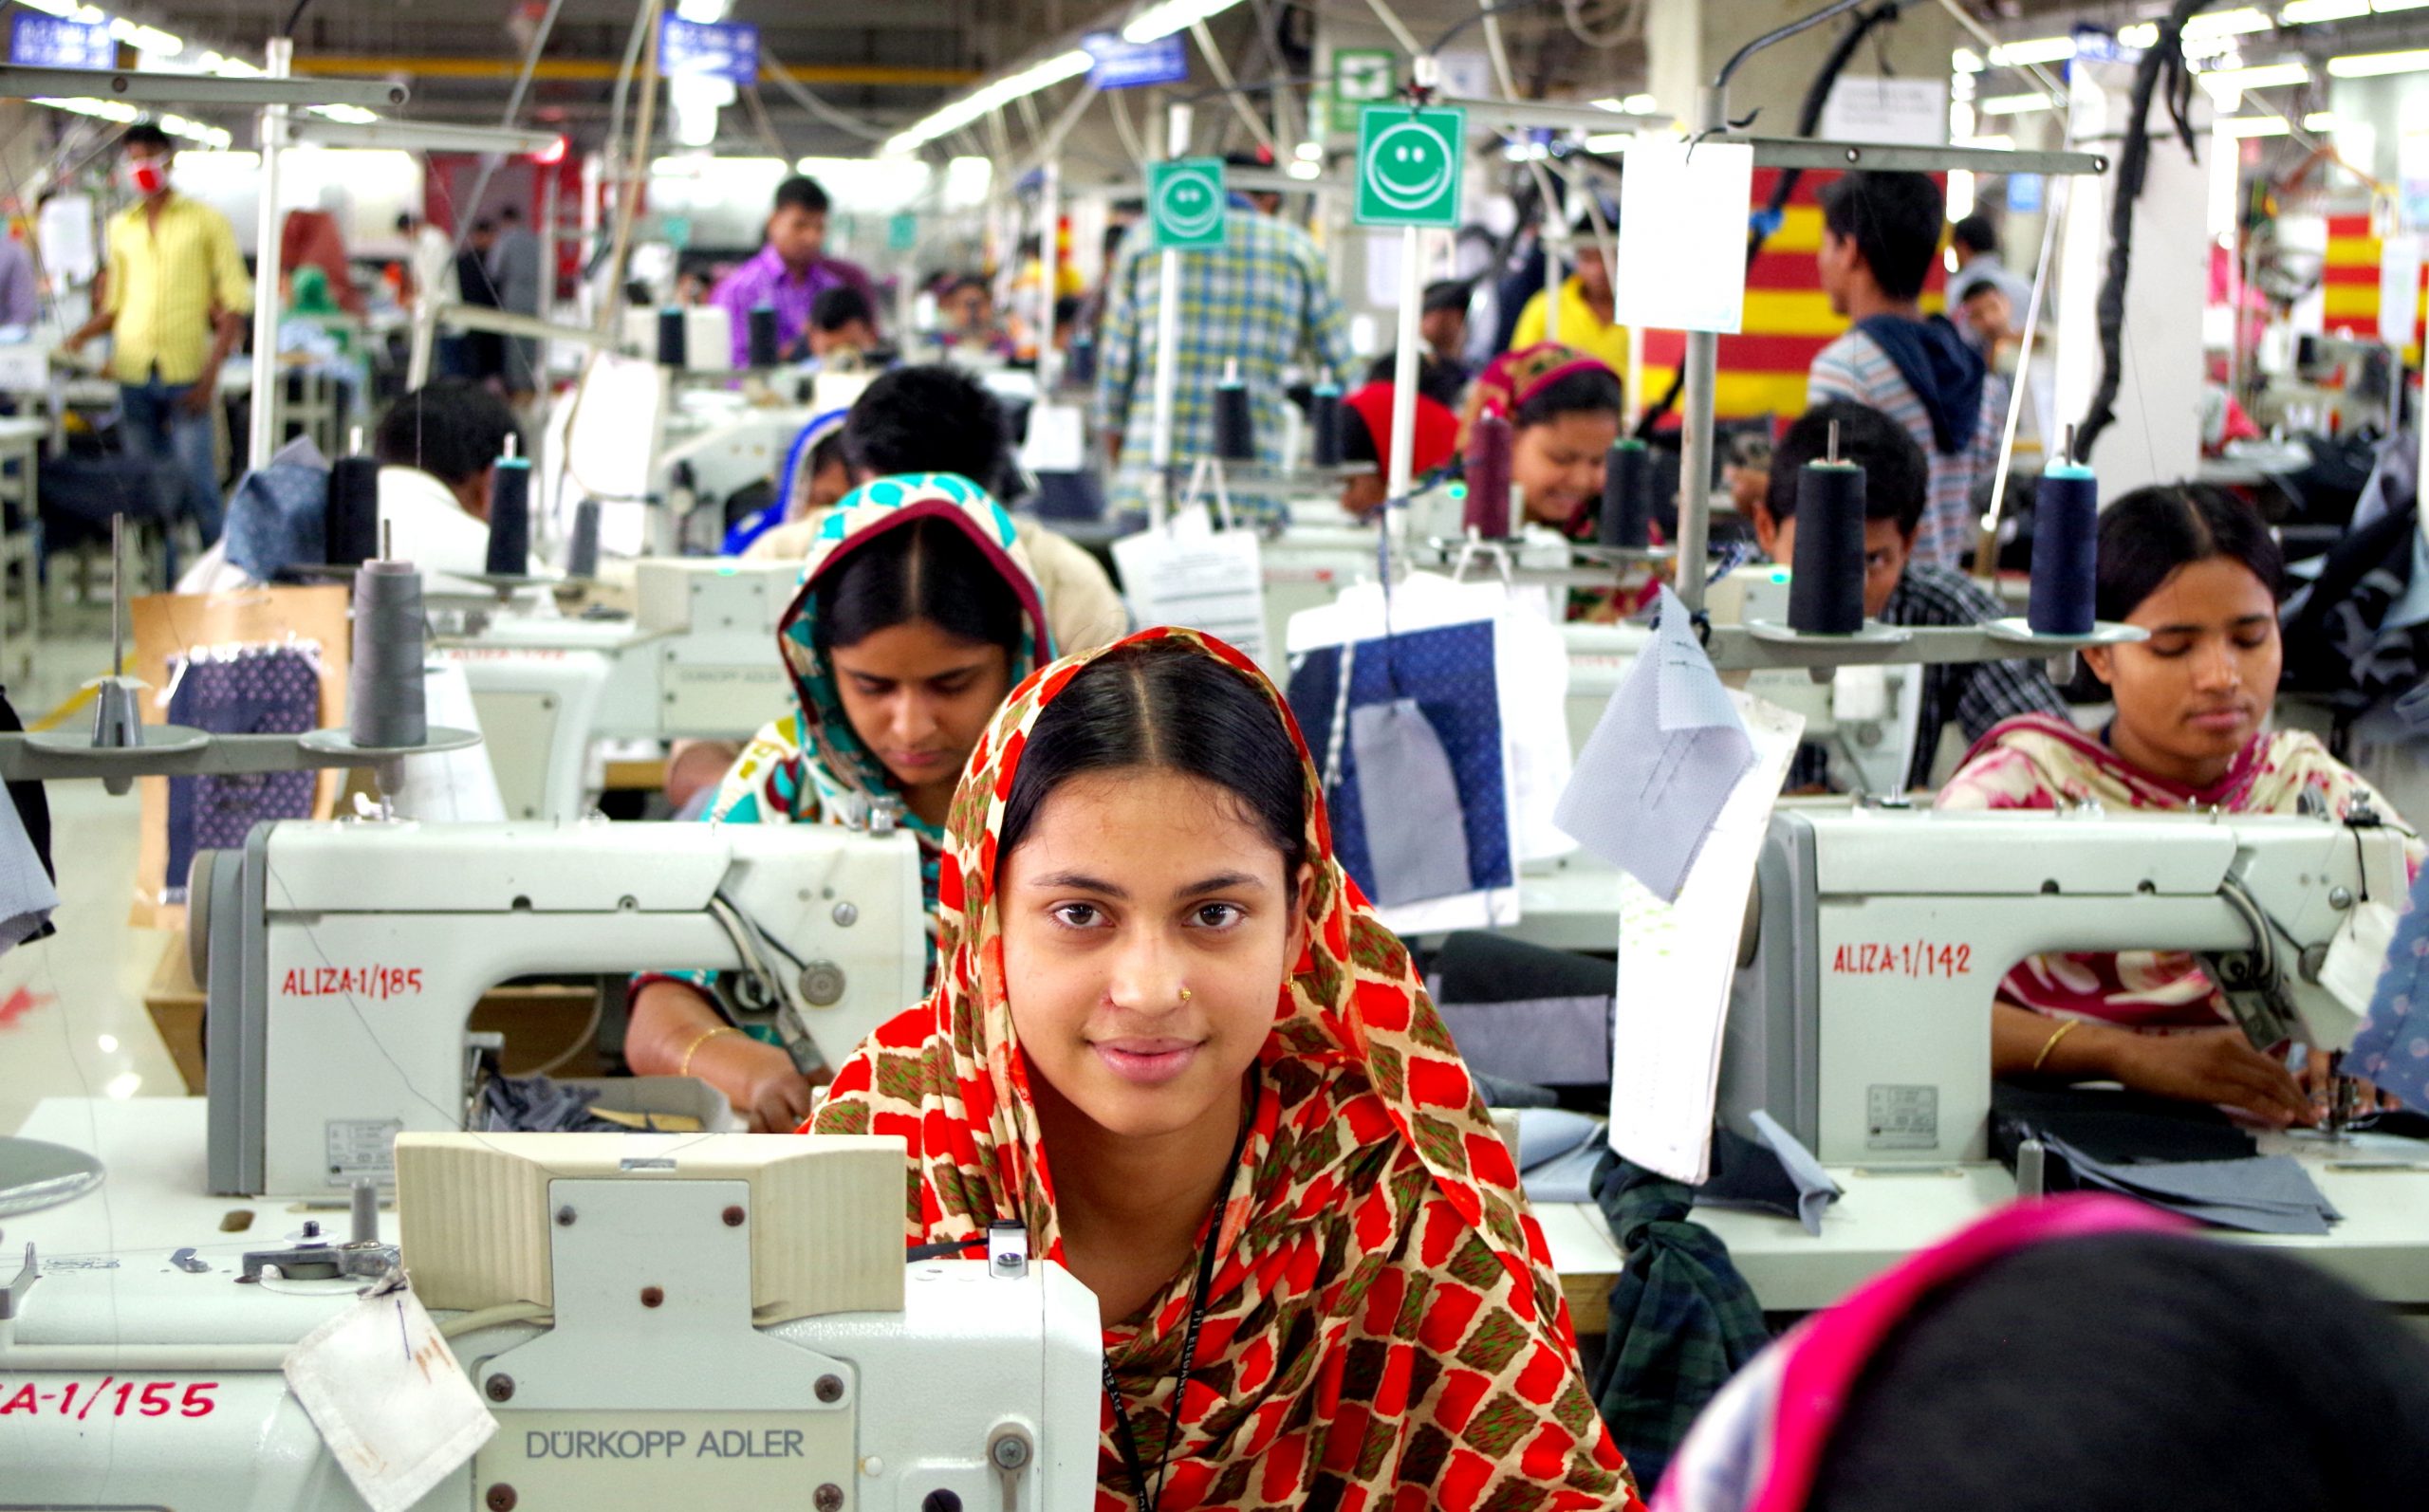 Garment workers in a COVID-19 world: Re-inventing a broken system